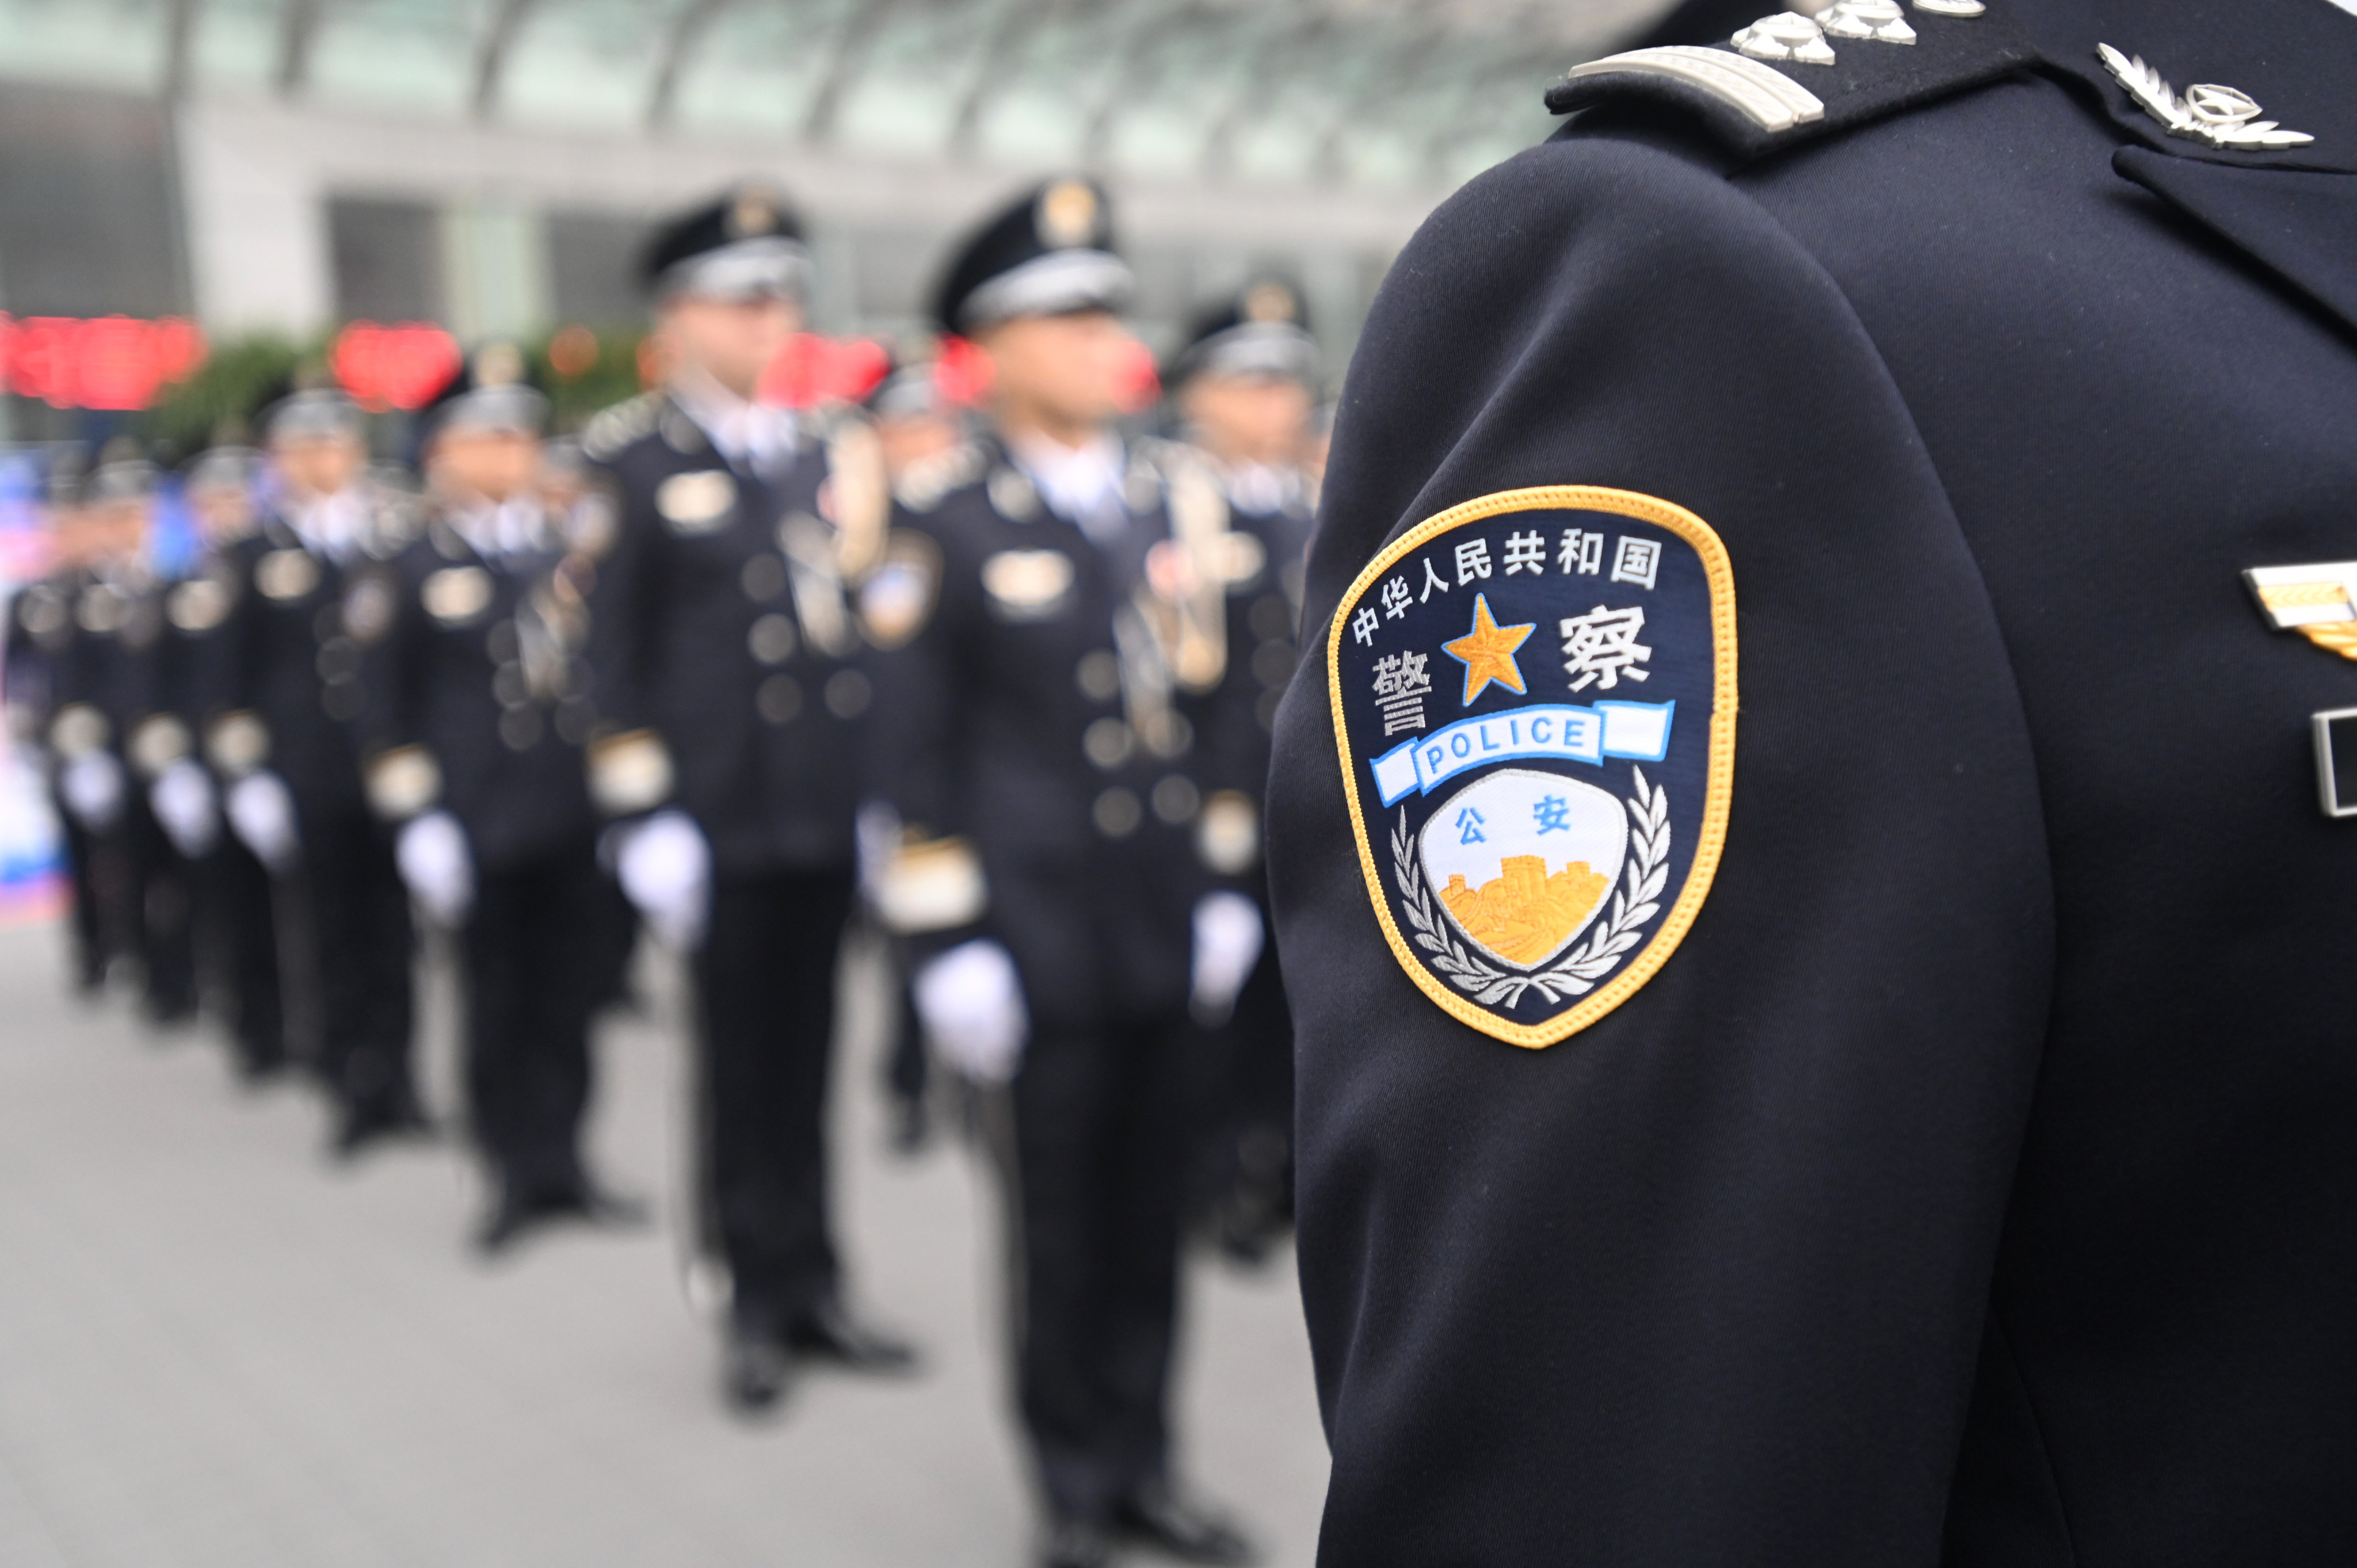 Under a three-year plan, more officers will be sent to police stations, residential communities in cities, and villages in rural areas. Photo: VCG via Getty Images